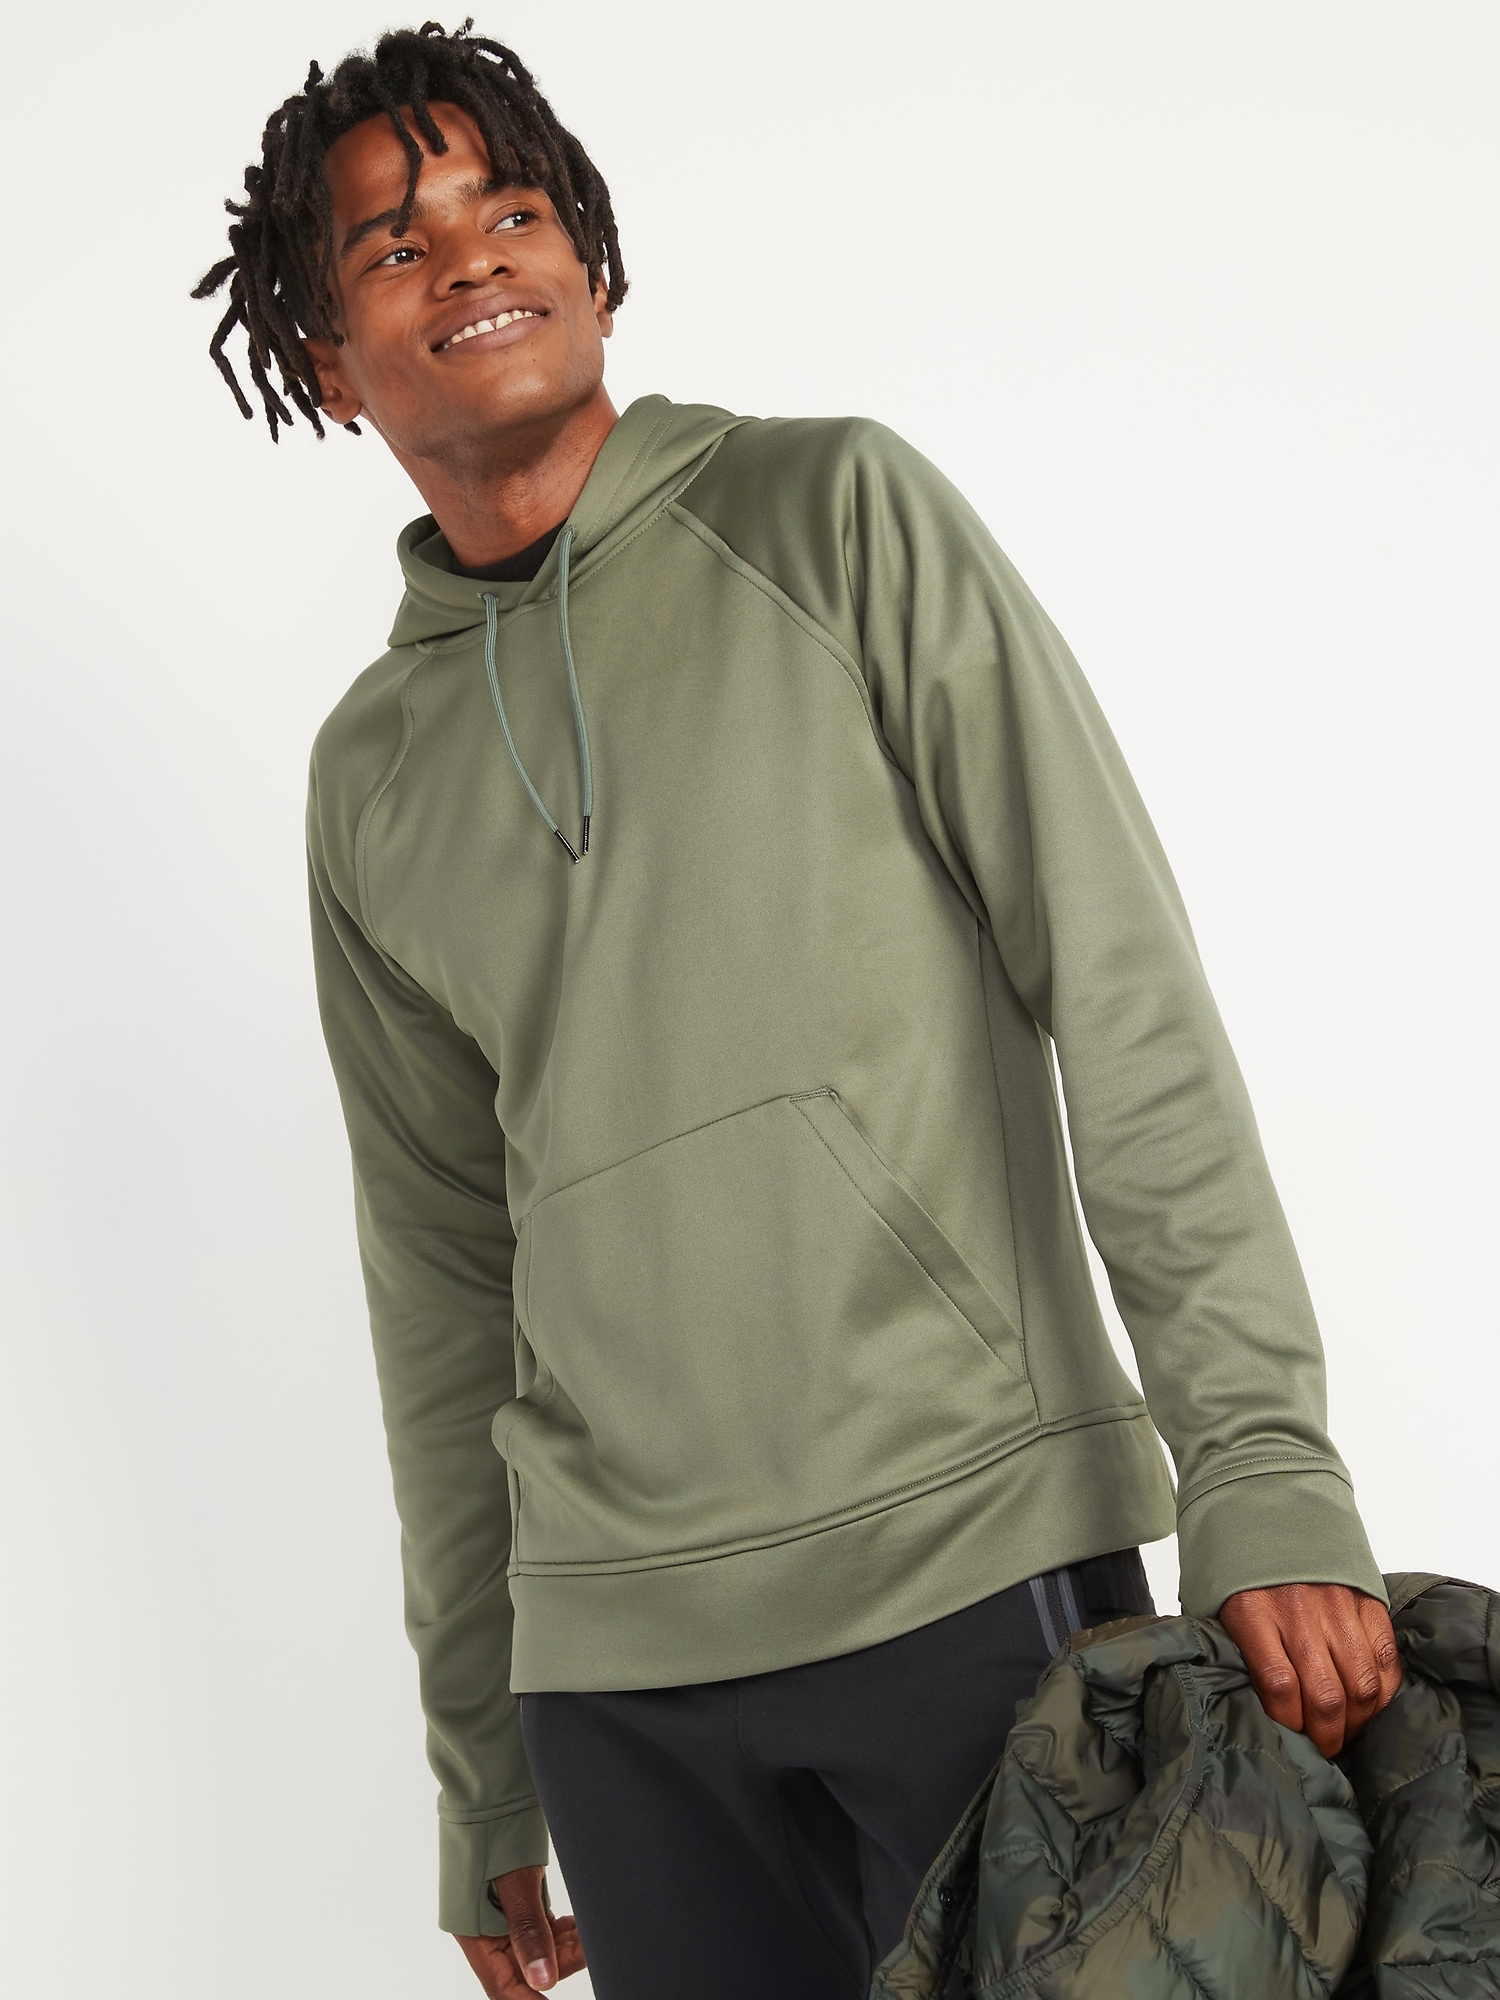 Old Navy Men's Soft-Brushed Go-Dry Performance Pullover Hoodie (Olive)